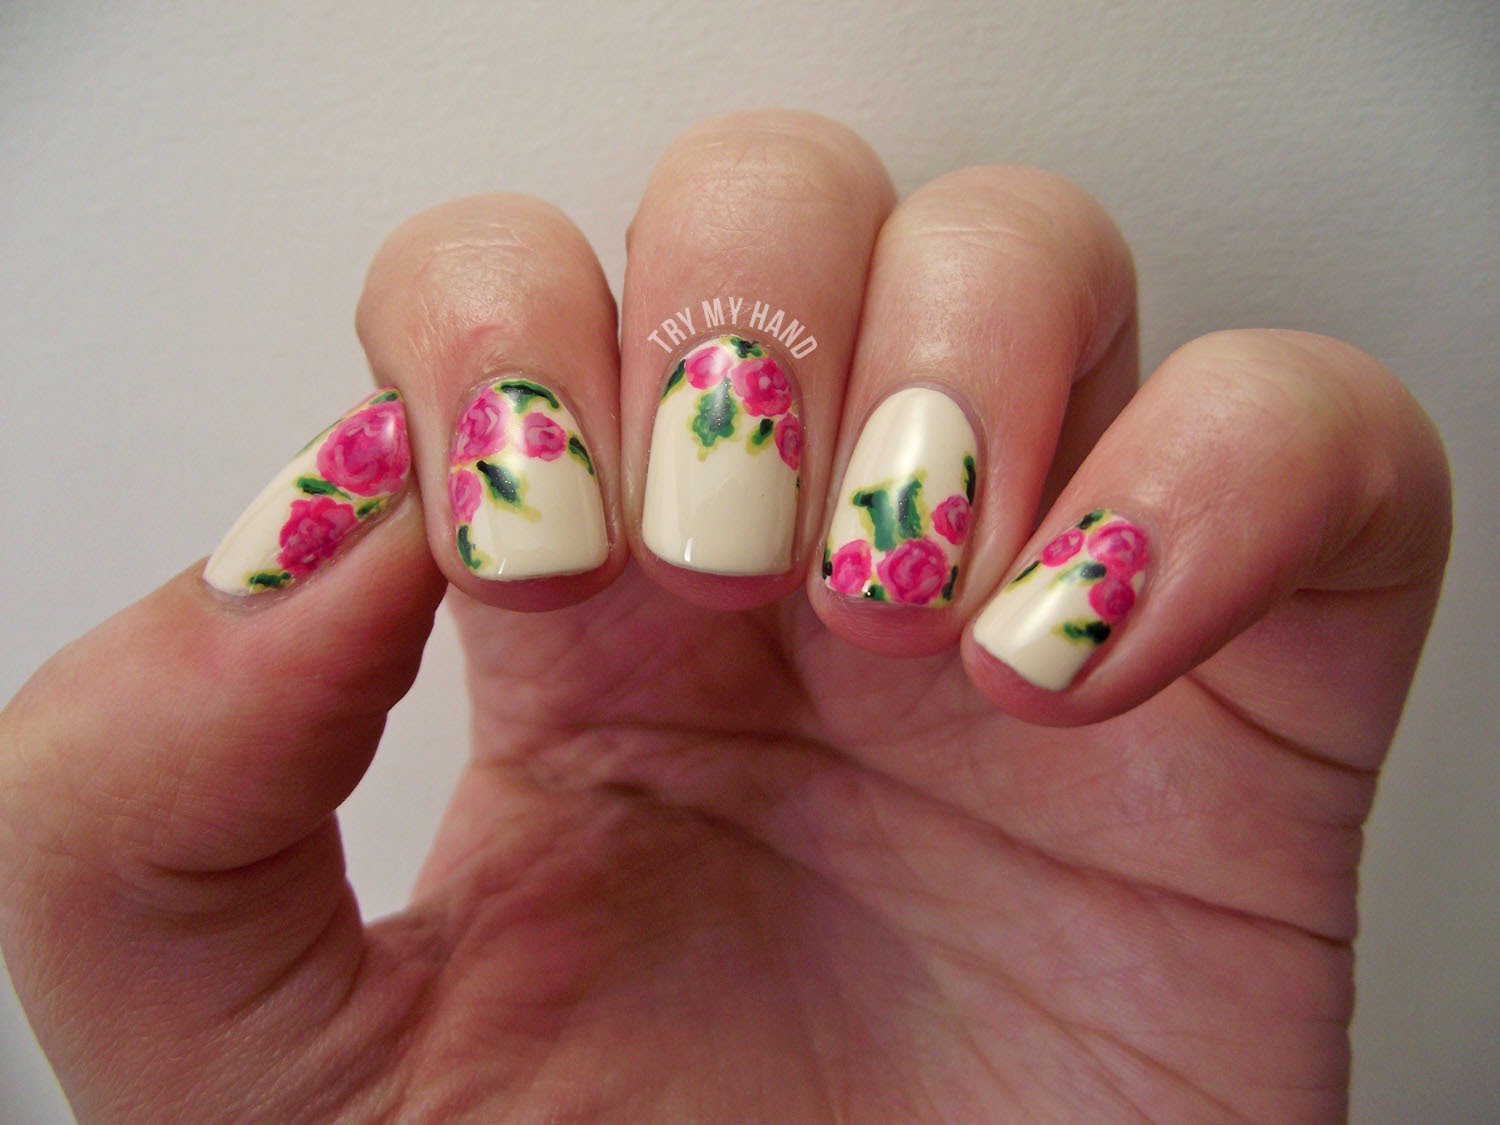 8. "Floral Hipster Nail Art Tutorial" - wide 2